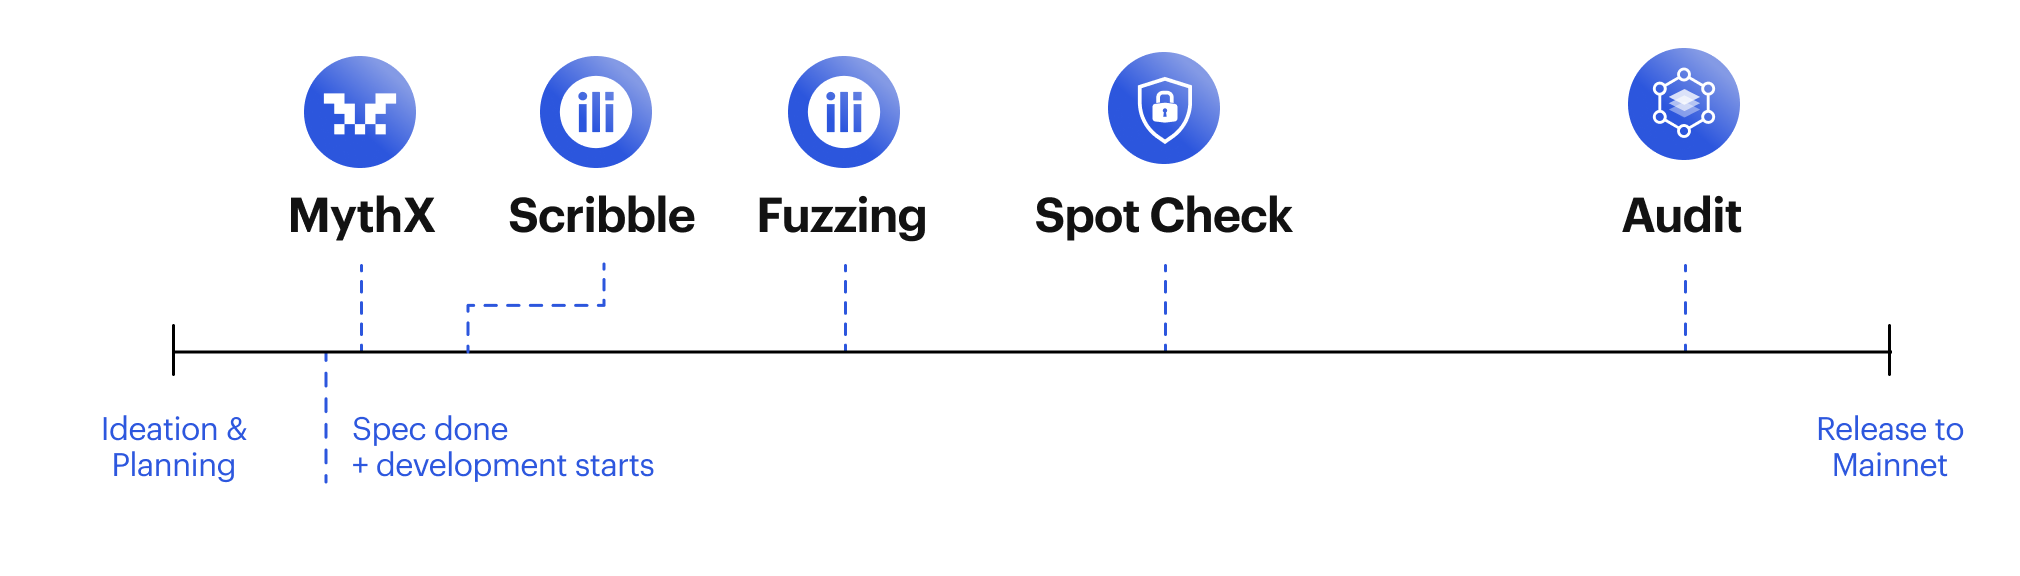 Multi-layered smart contract security strategy: MythX, Scribble, Fuzzing, Spot Check, and Audit.